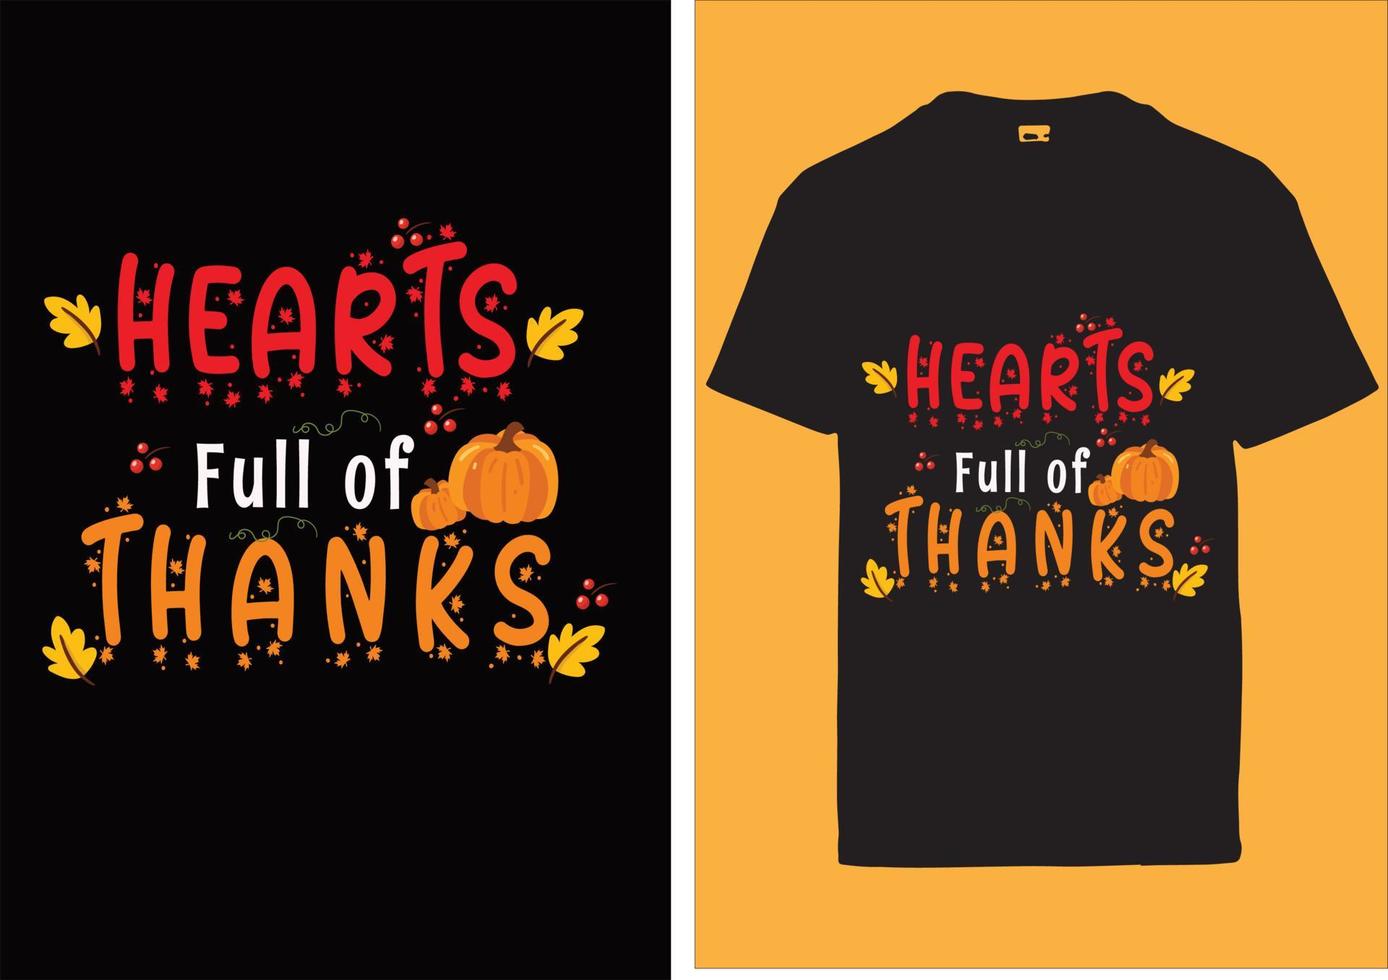 Thanks giving day t shirt design vector